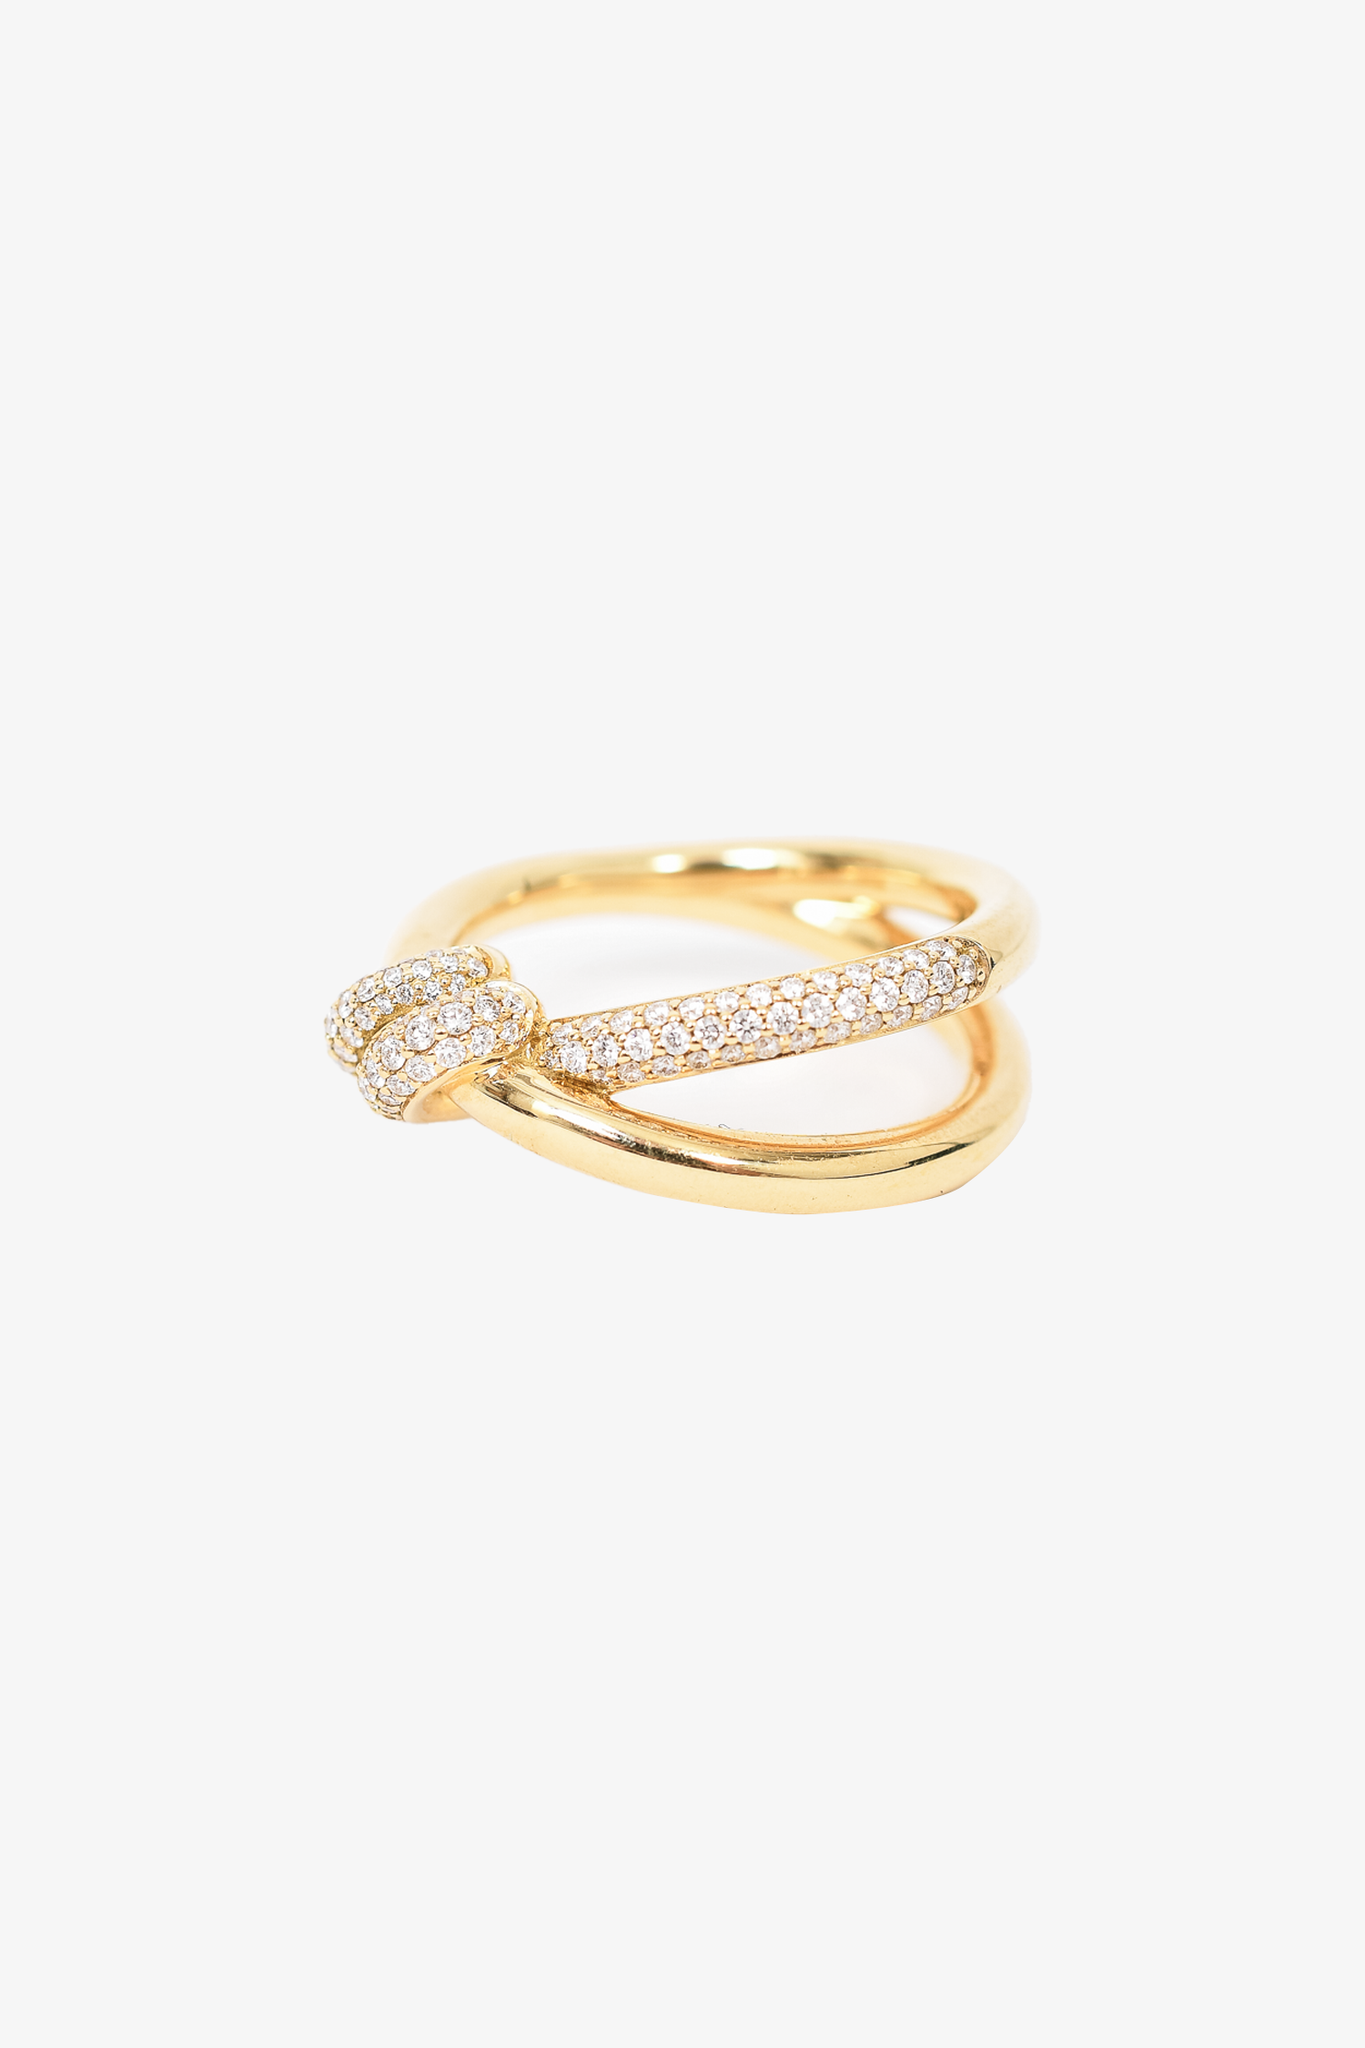 Tiffany Knot Double Row Ring in Yellow Gold with Diamonds, Size: 6 1/2